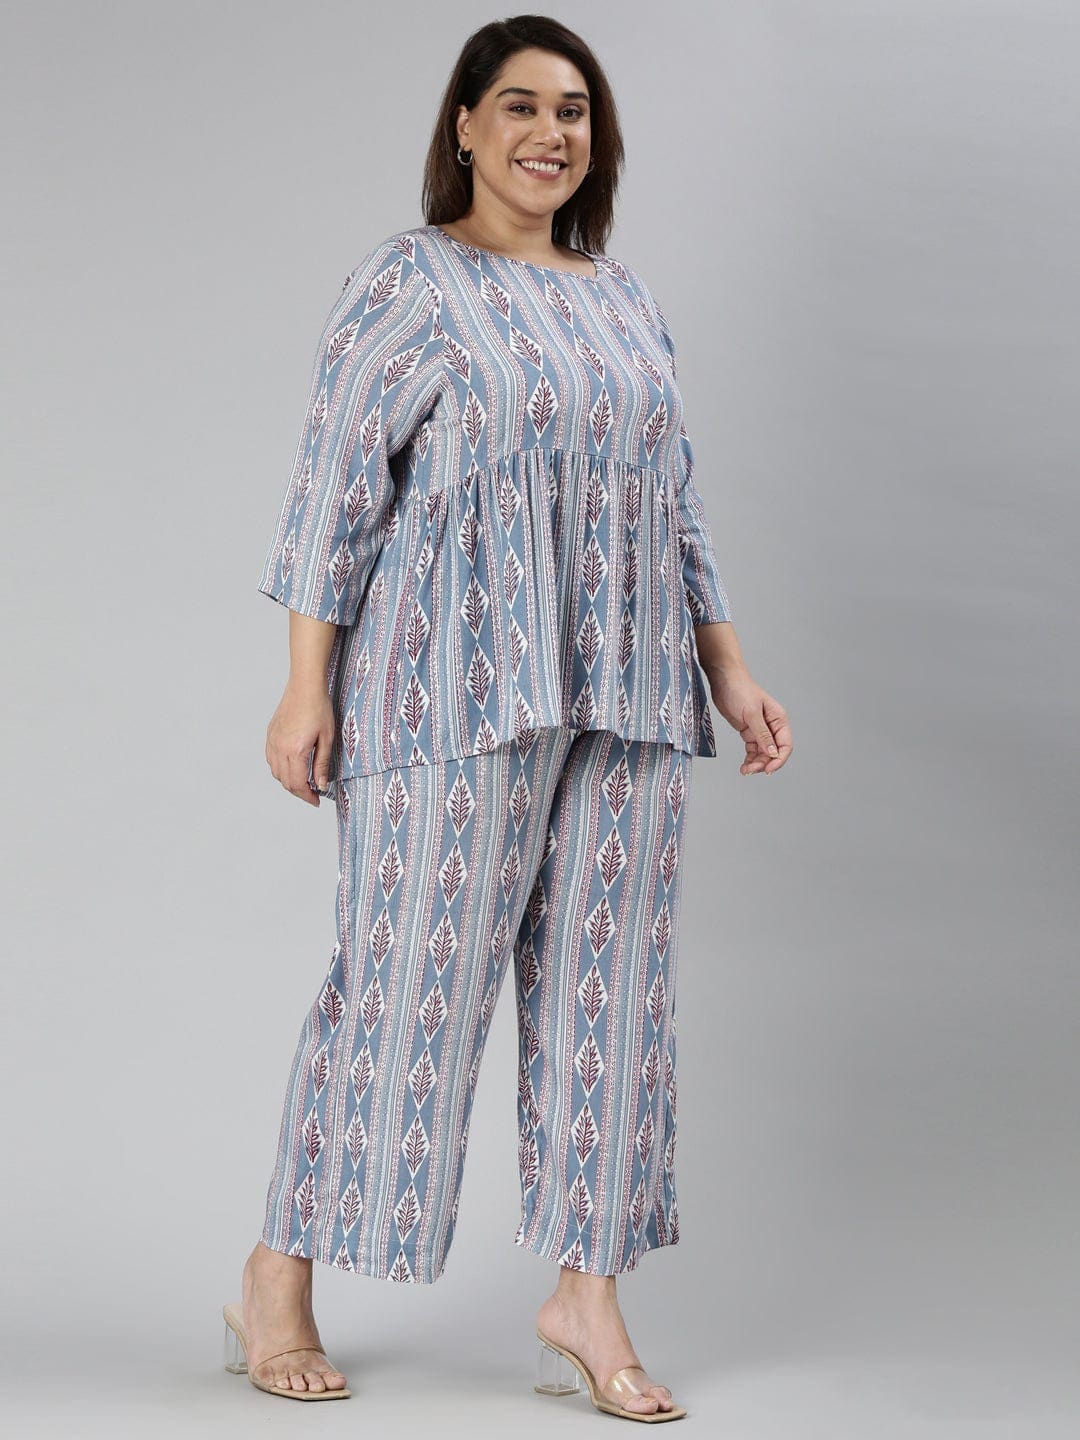 Buy  peplum dress /Women's /Pink ethnic prBuy  peplum dress /Women's /Blue ethnic printed /peplum top /palazzo pant on online from the Shailiinted /peplum top /palazzo pant on online from the Shaili